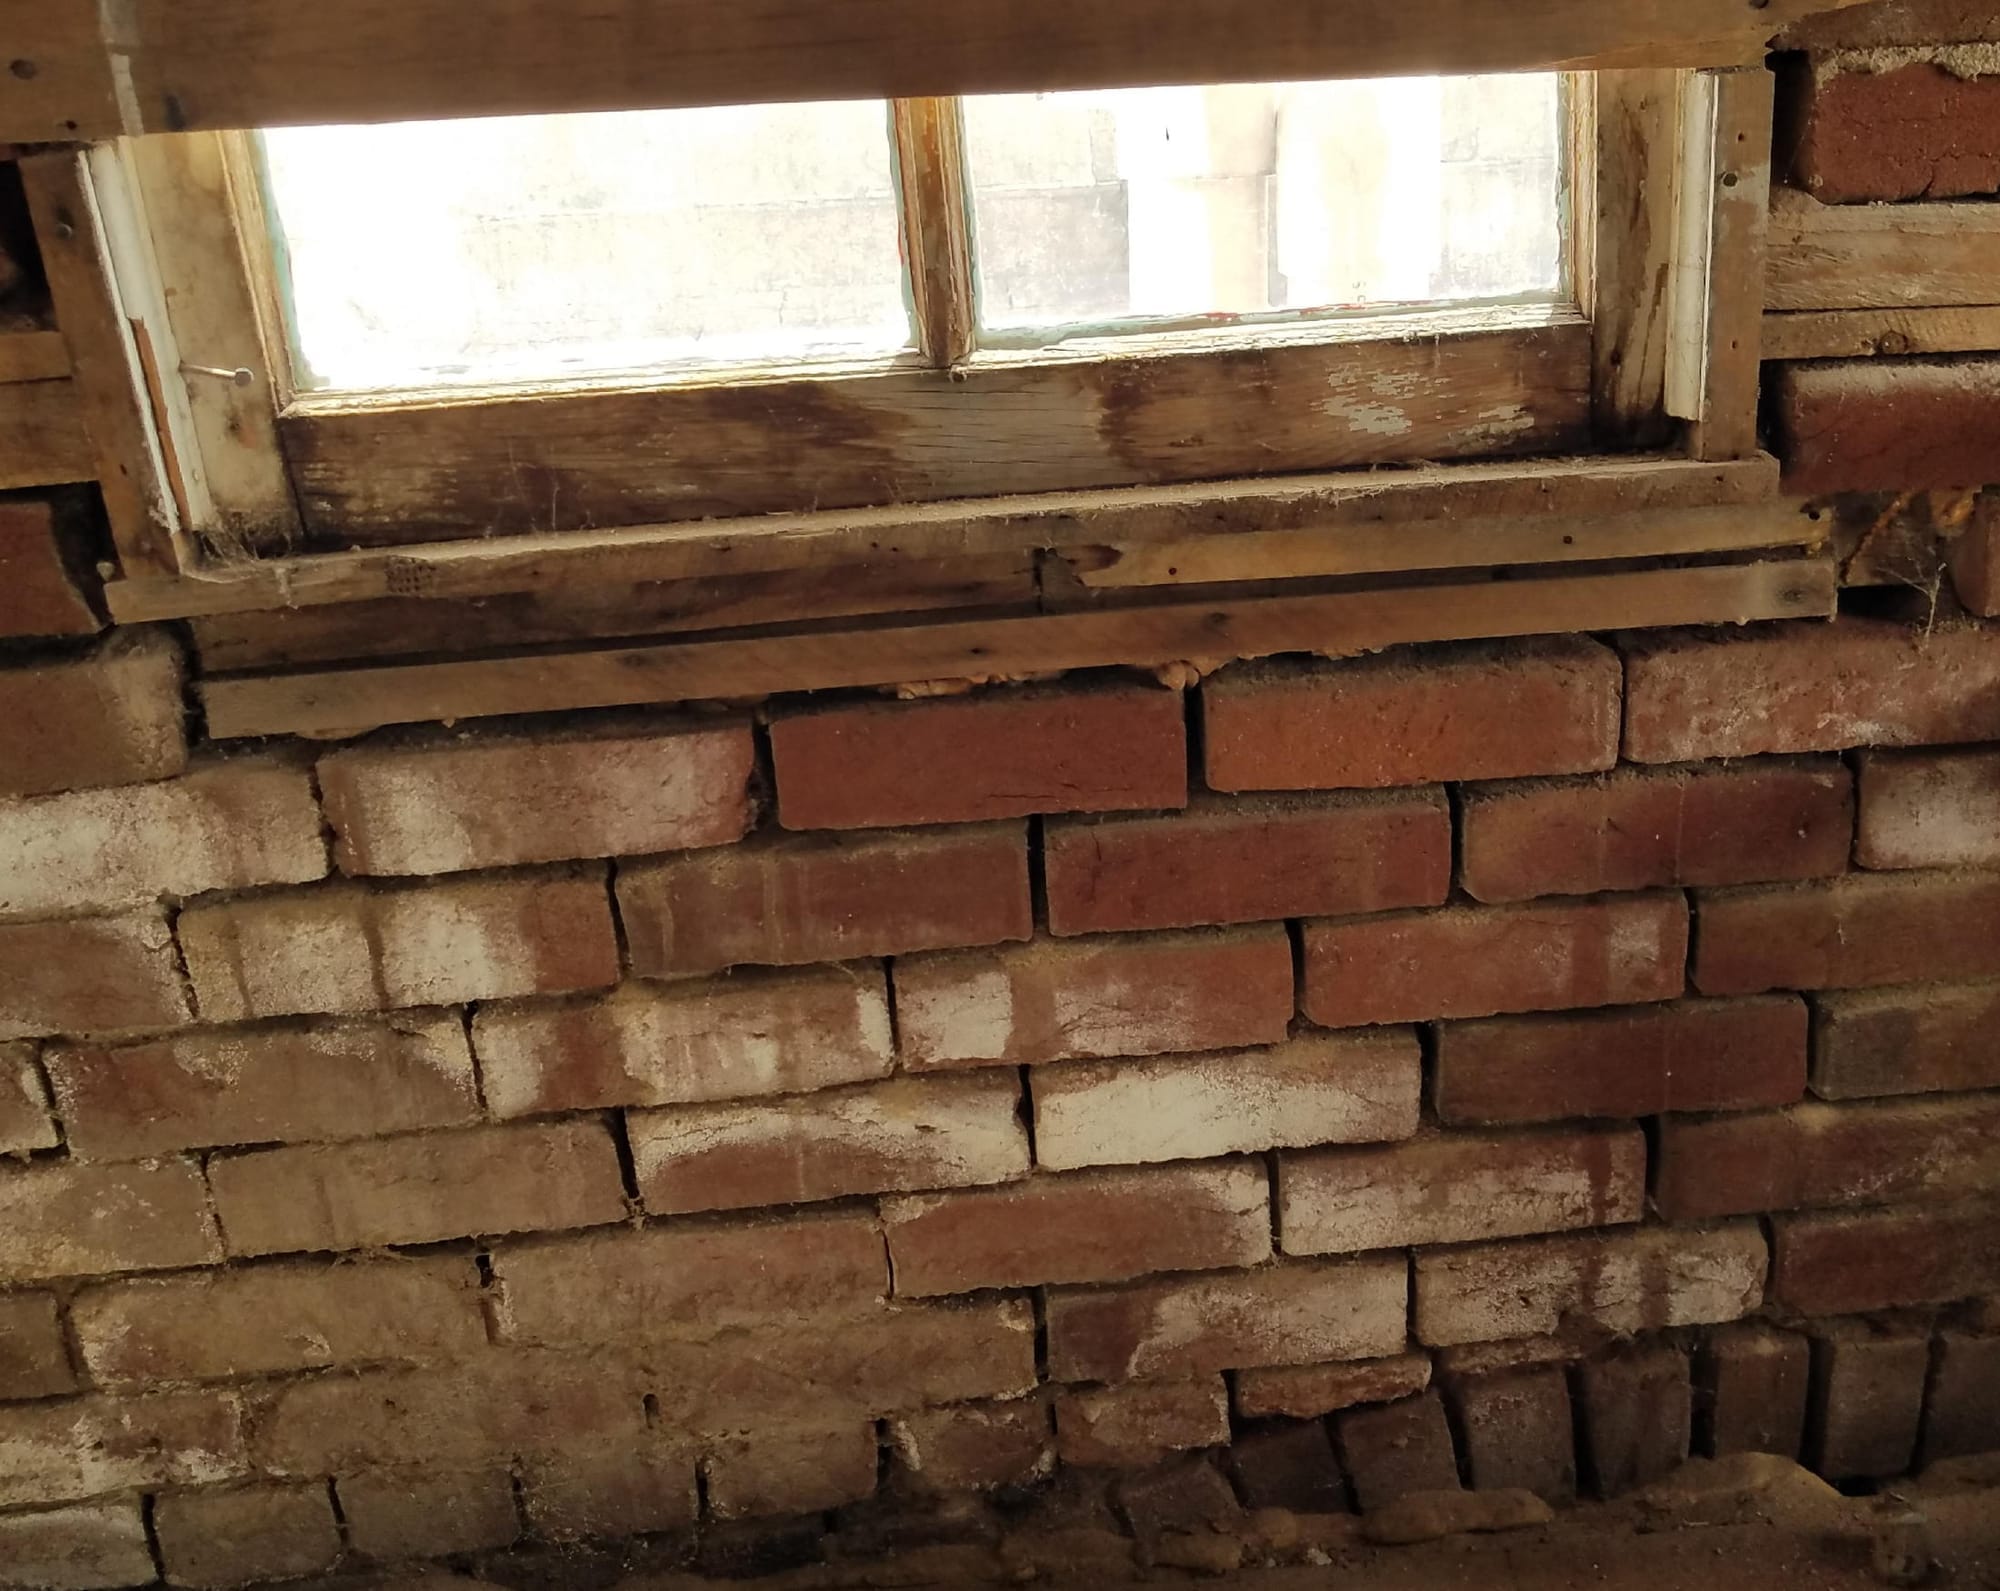 brick walls with little mortar visible; water damaged wood sill under window